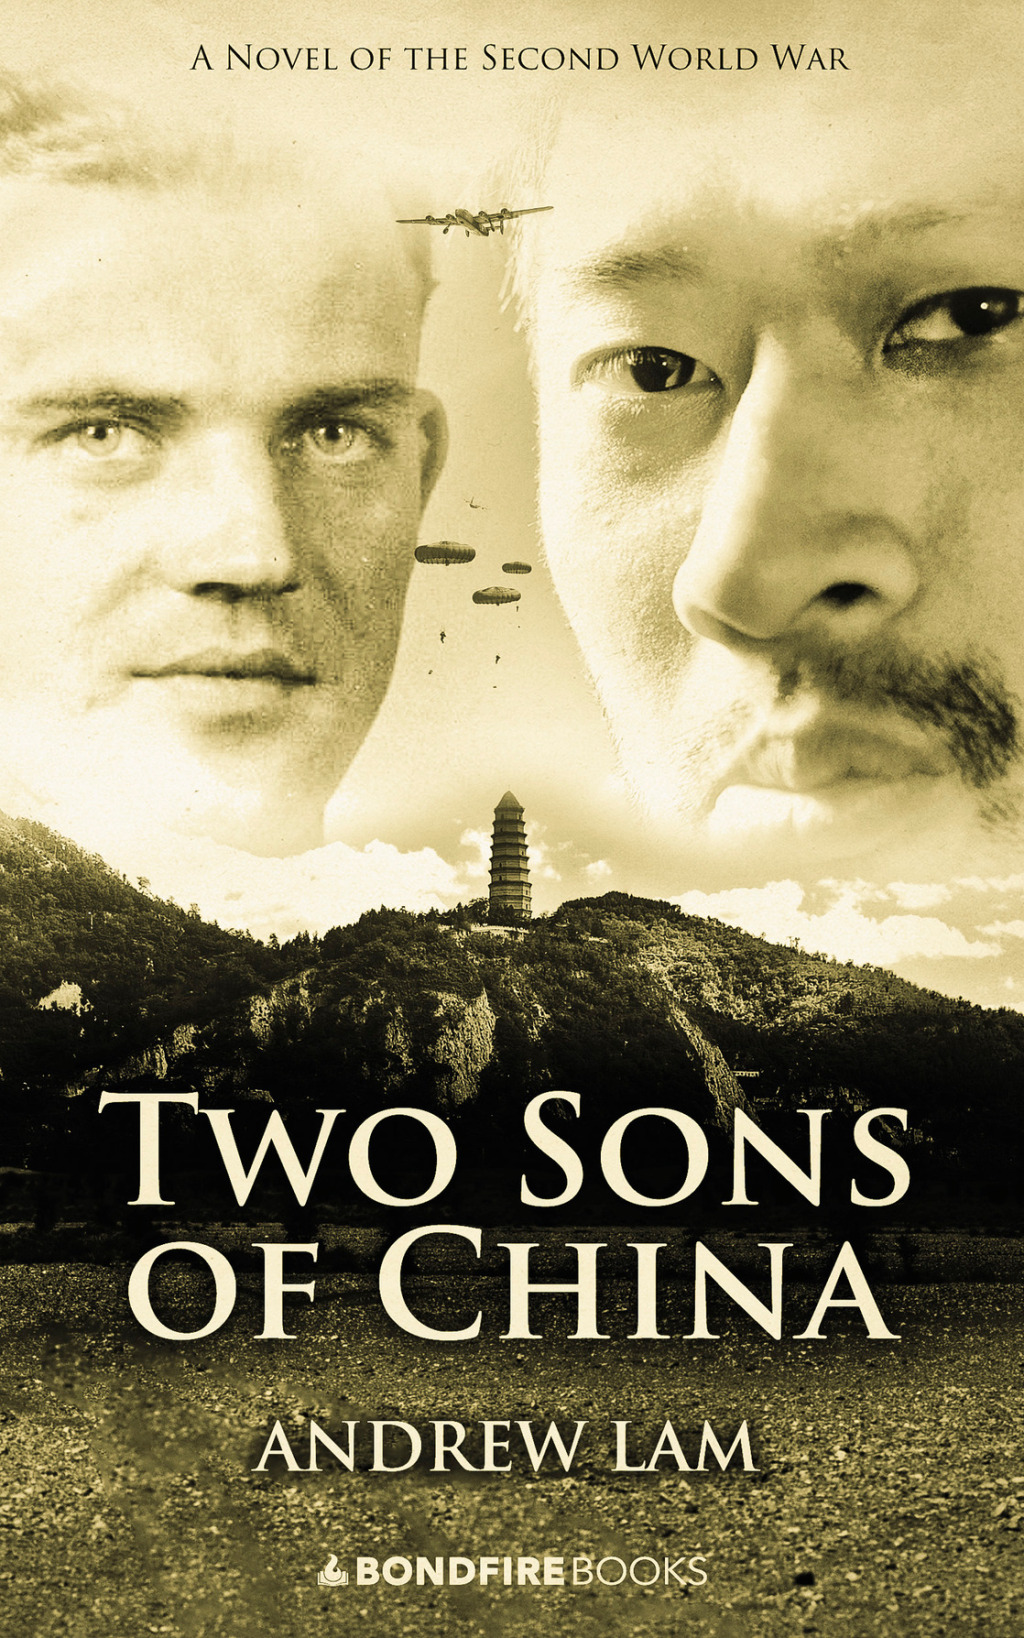 Two Sons of China (eBook) - Andrew Lam,